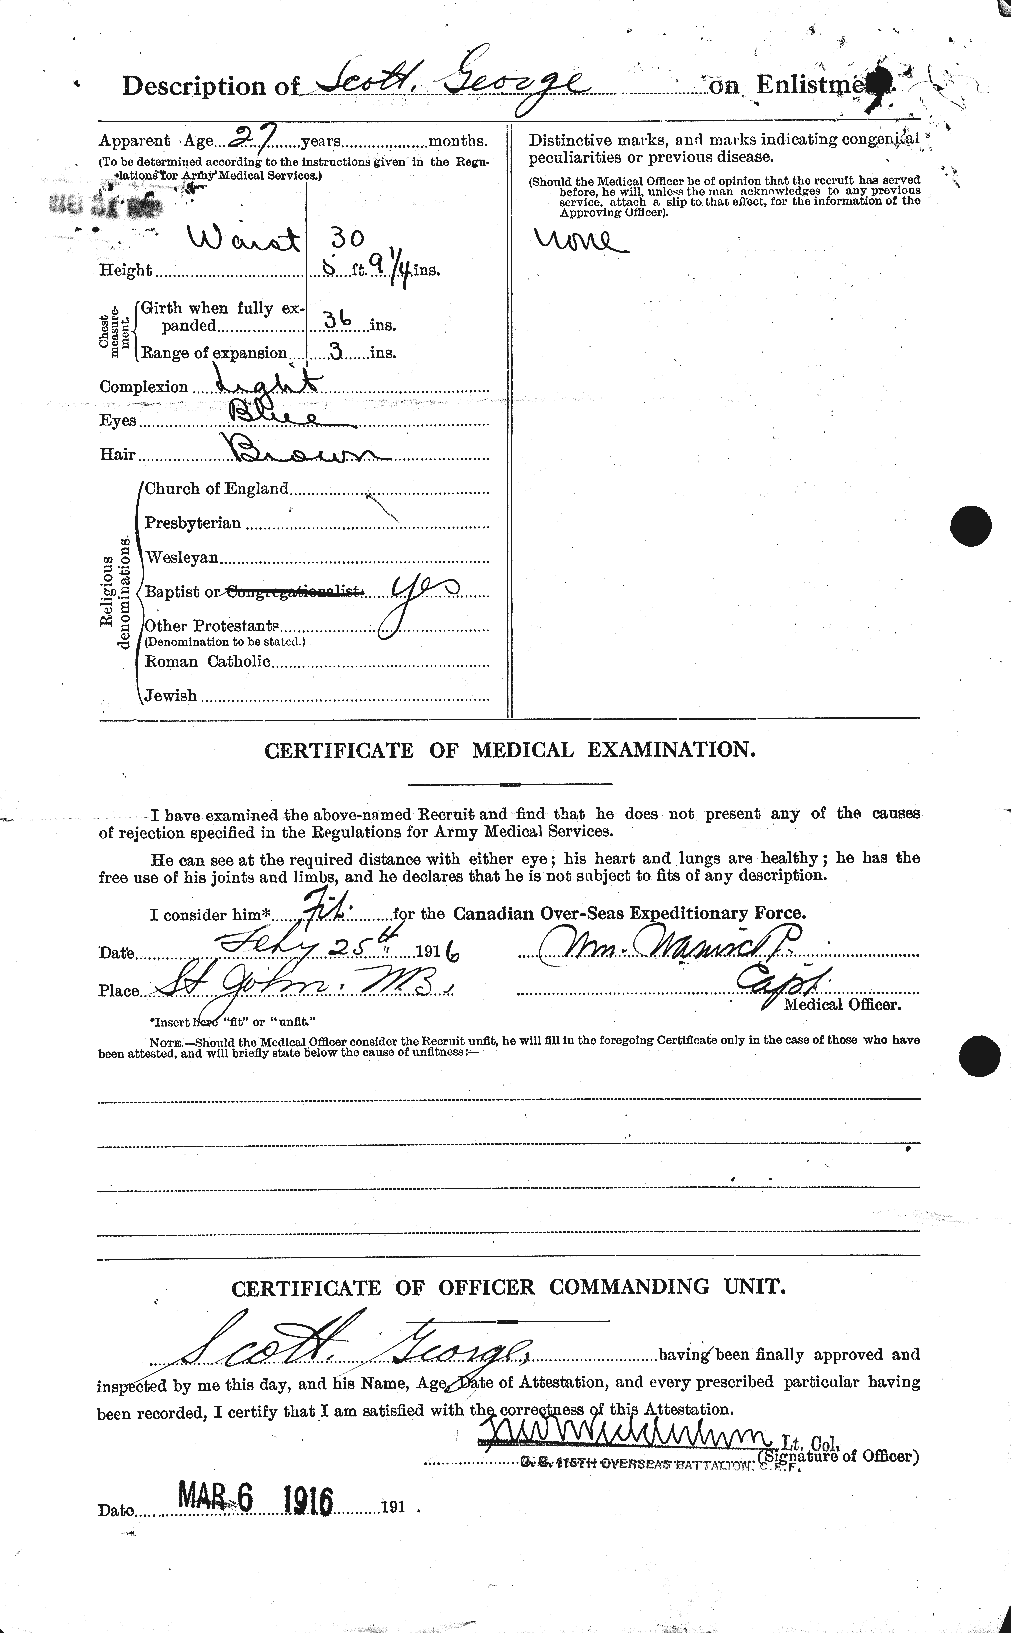 Personnel Records of the First World War - CEF 083579b